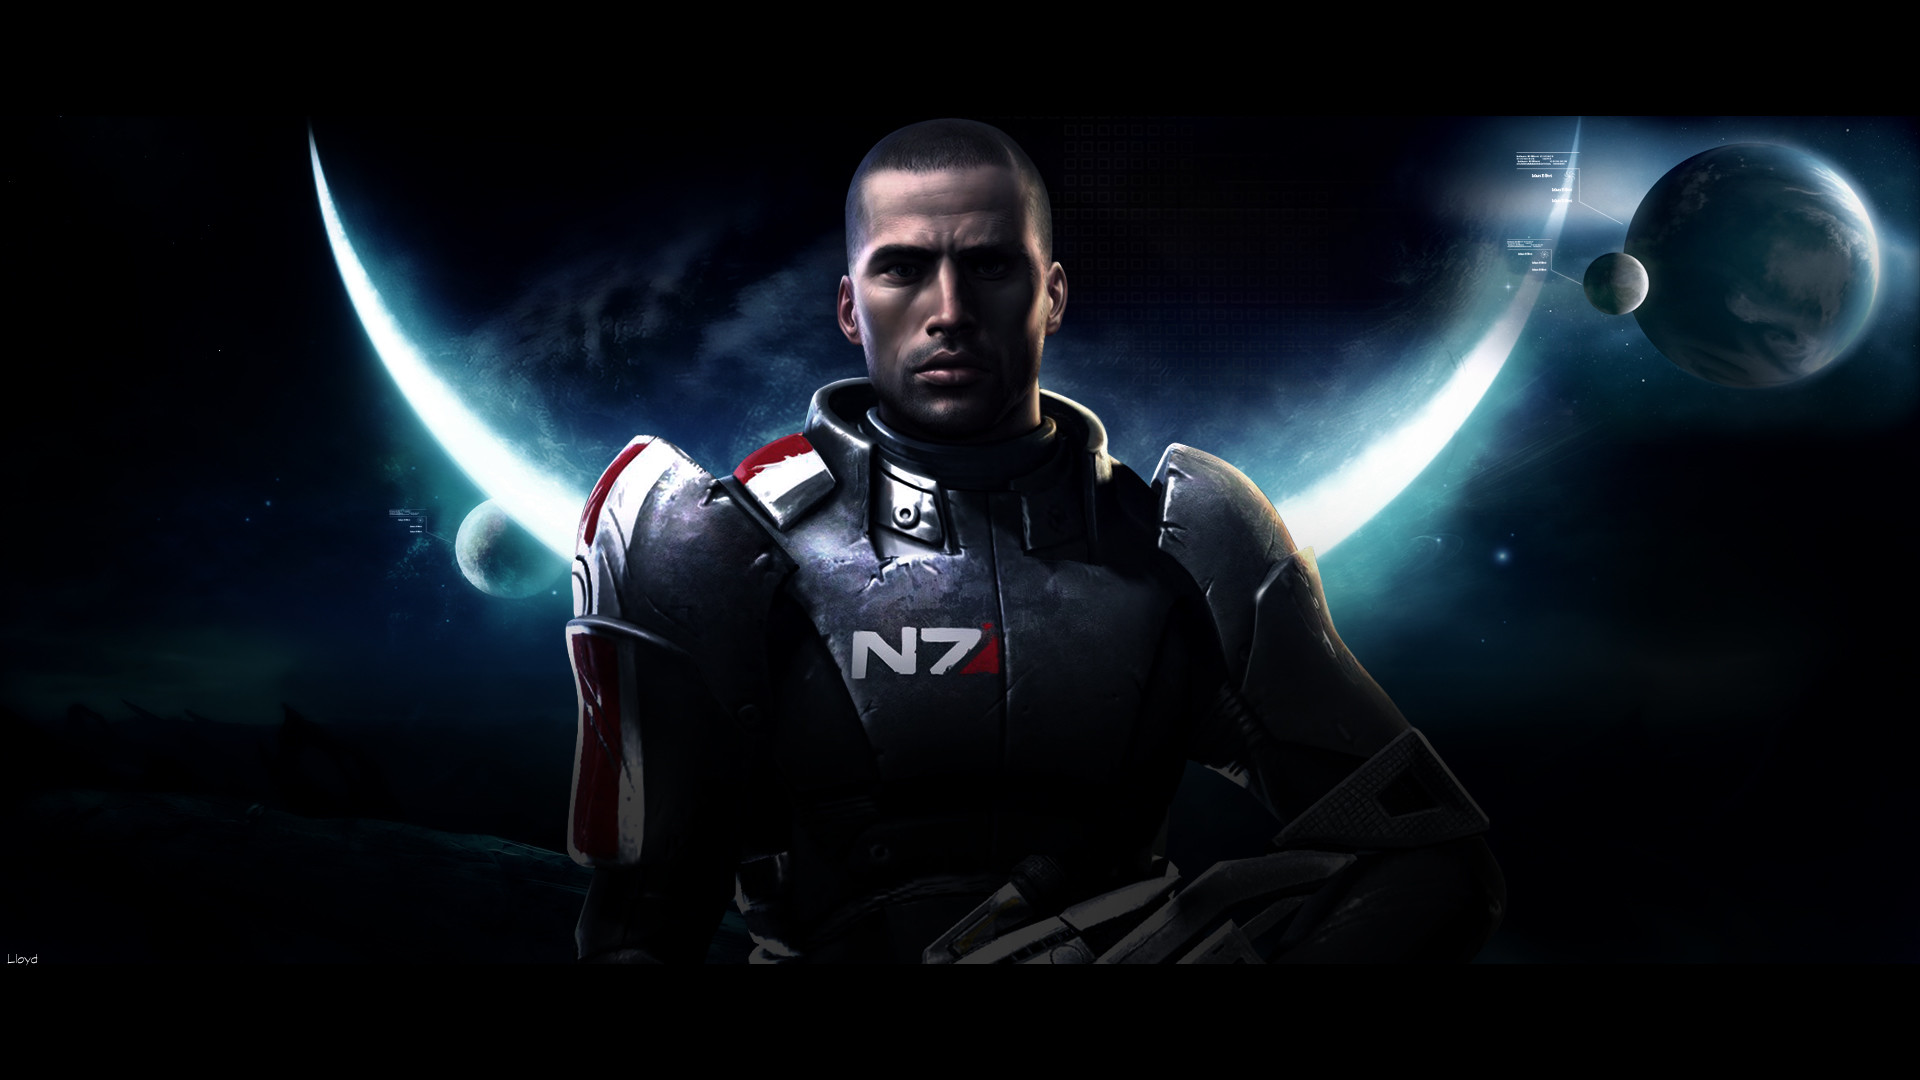 1920x1080 ... Mass Effect 2 Wallpaper 2 by igotgame1075